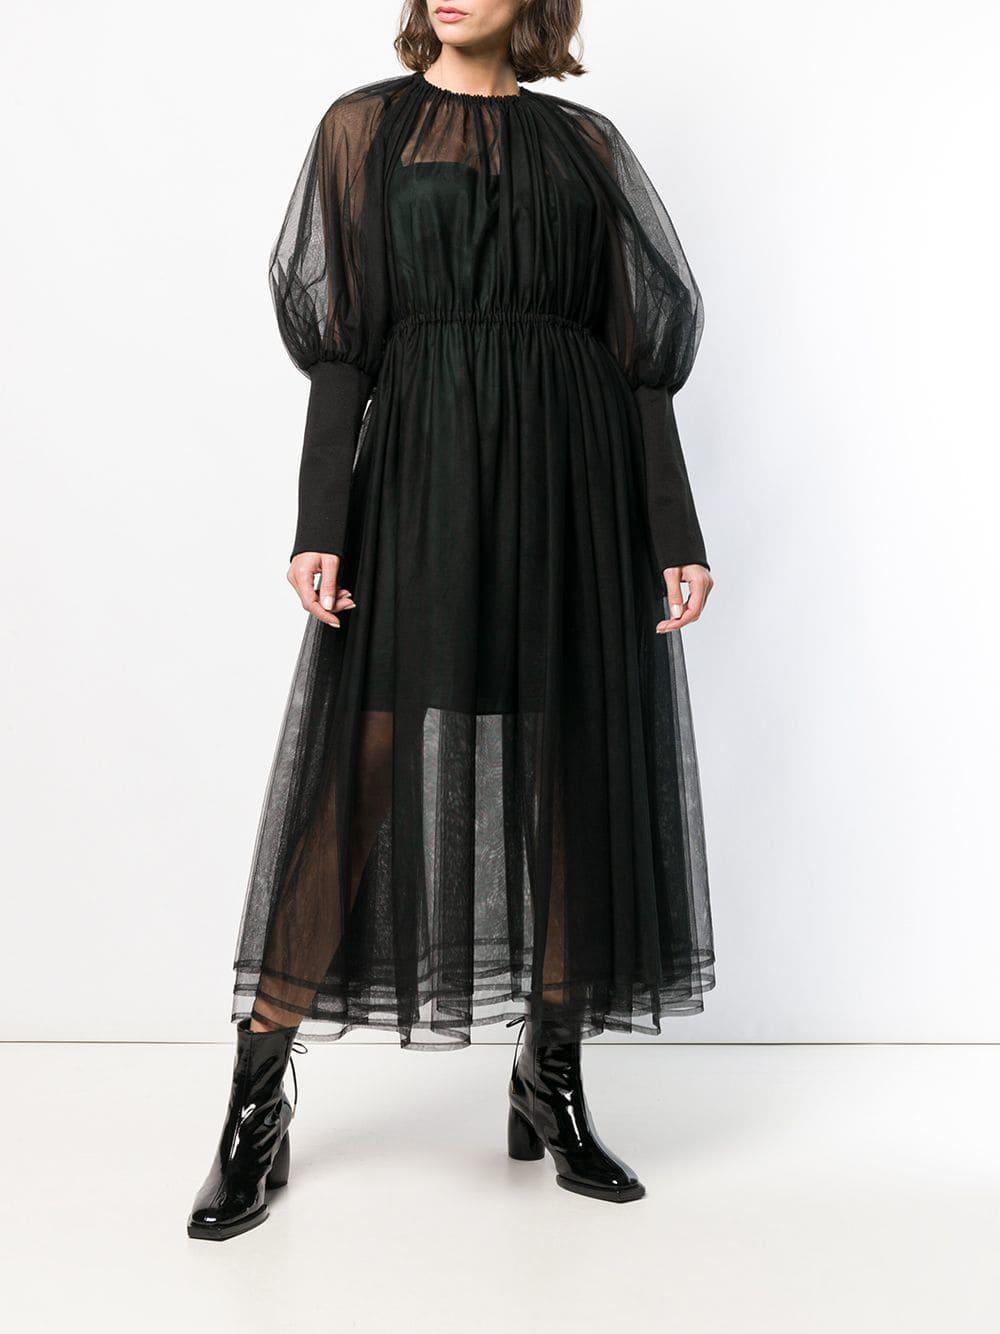 Comme des Garçons Synthetic Tulle Dress in Black - Lyst